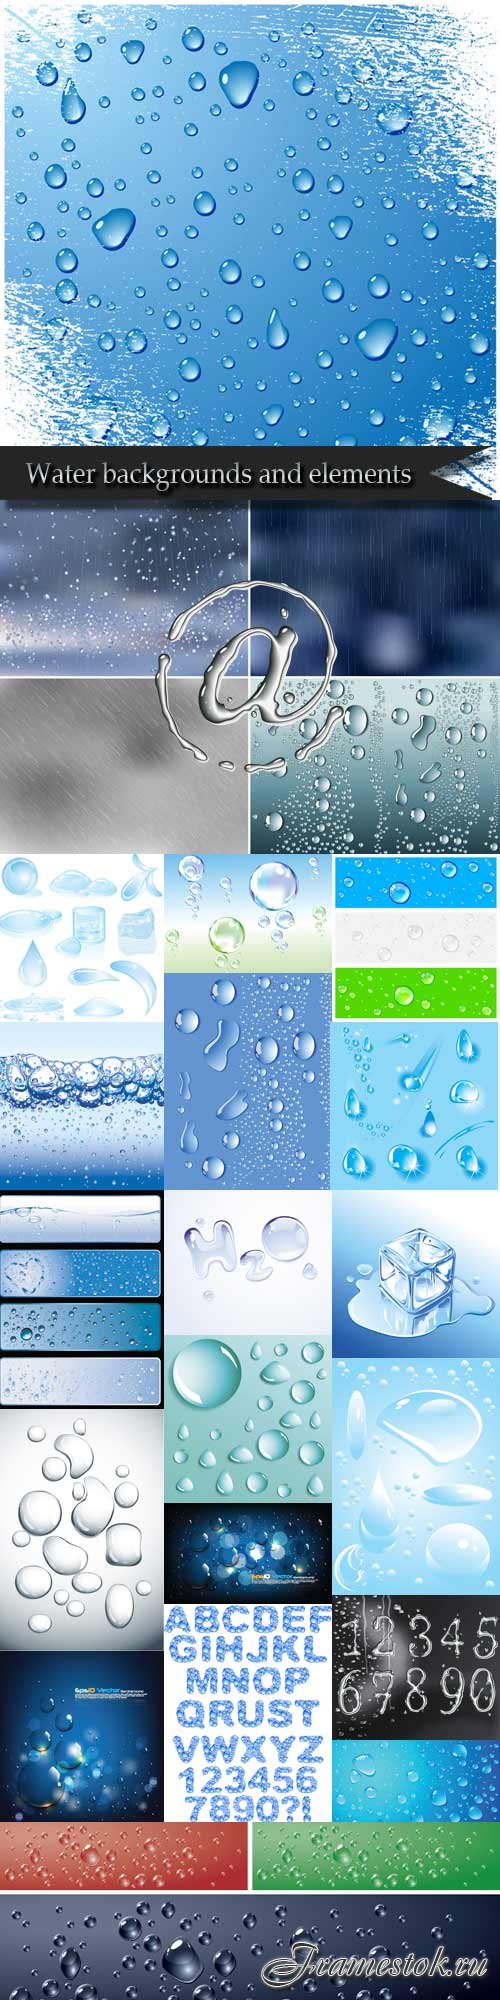 Water backgrounds and elements